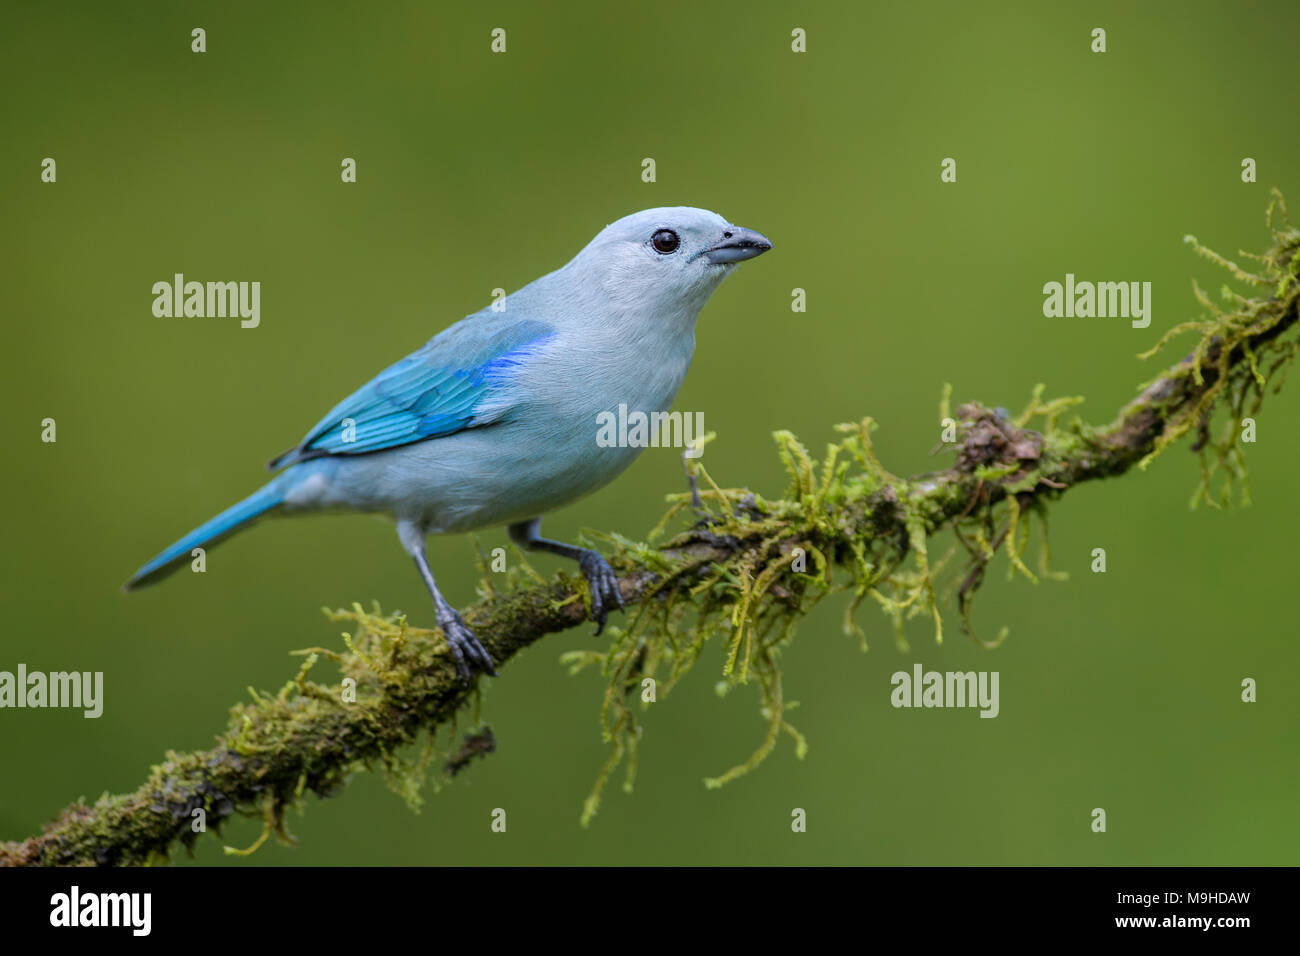 Blue-gray Tanager - Thraupis episcopus, beautiful colorful blue perching bird from Costa Rica forest. Stock Photo